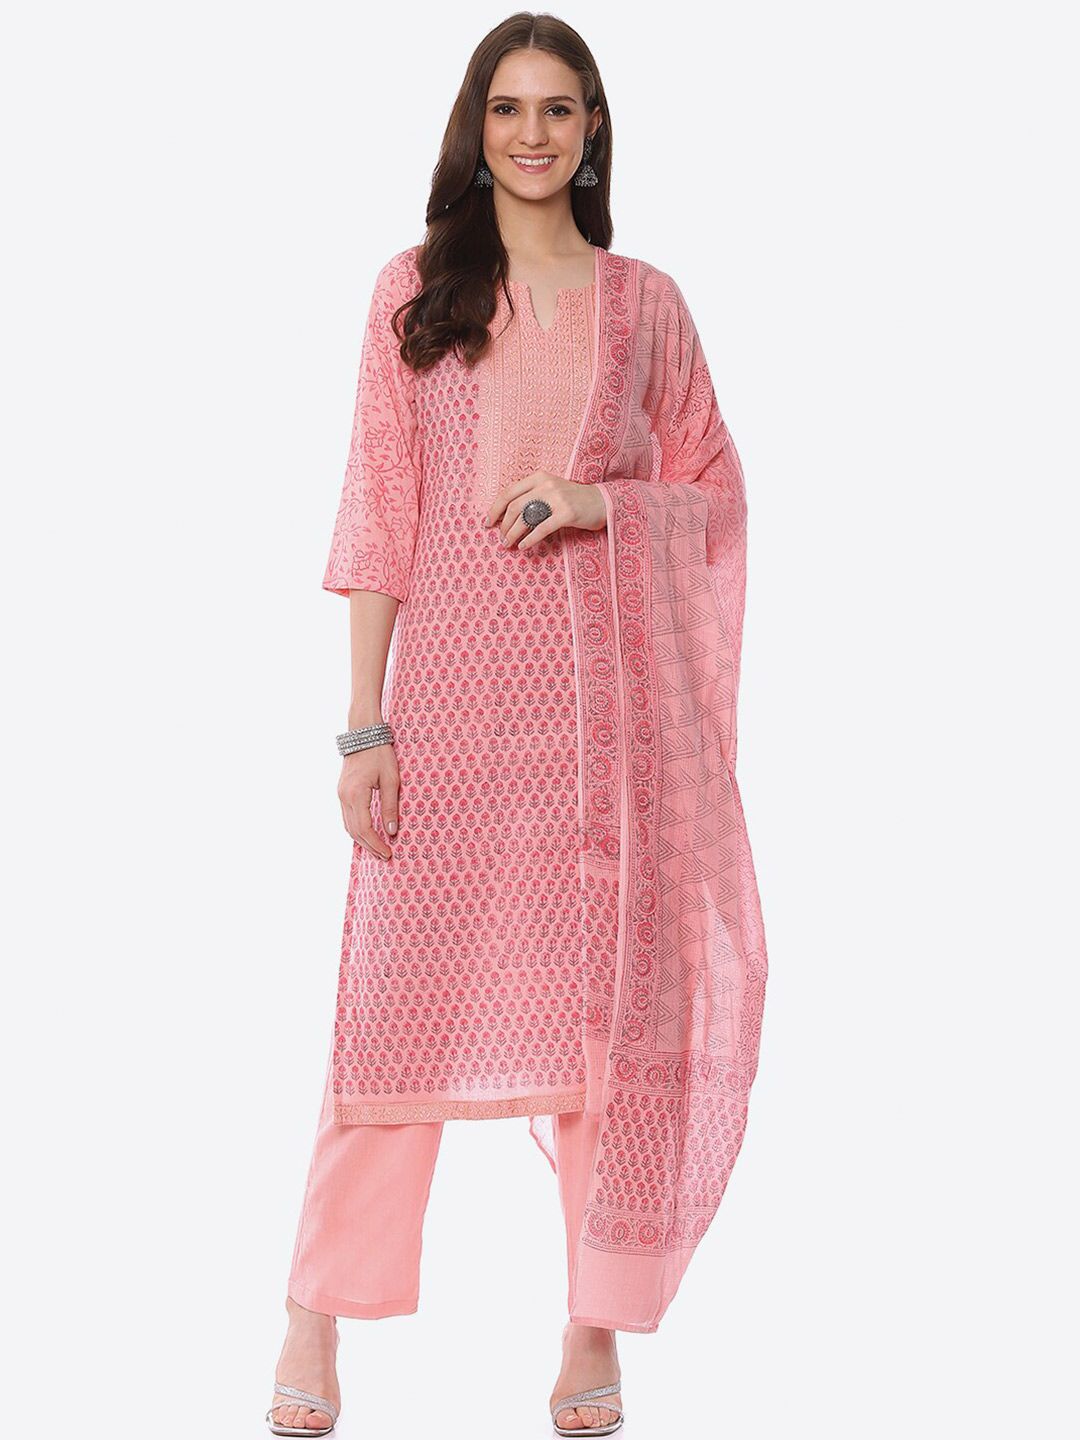 Biba Pink Printed Unstitched Dress Material Price in India